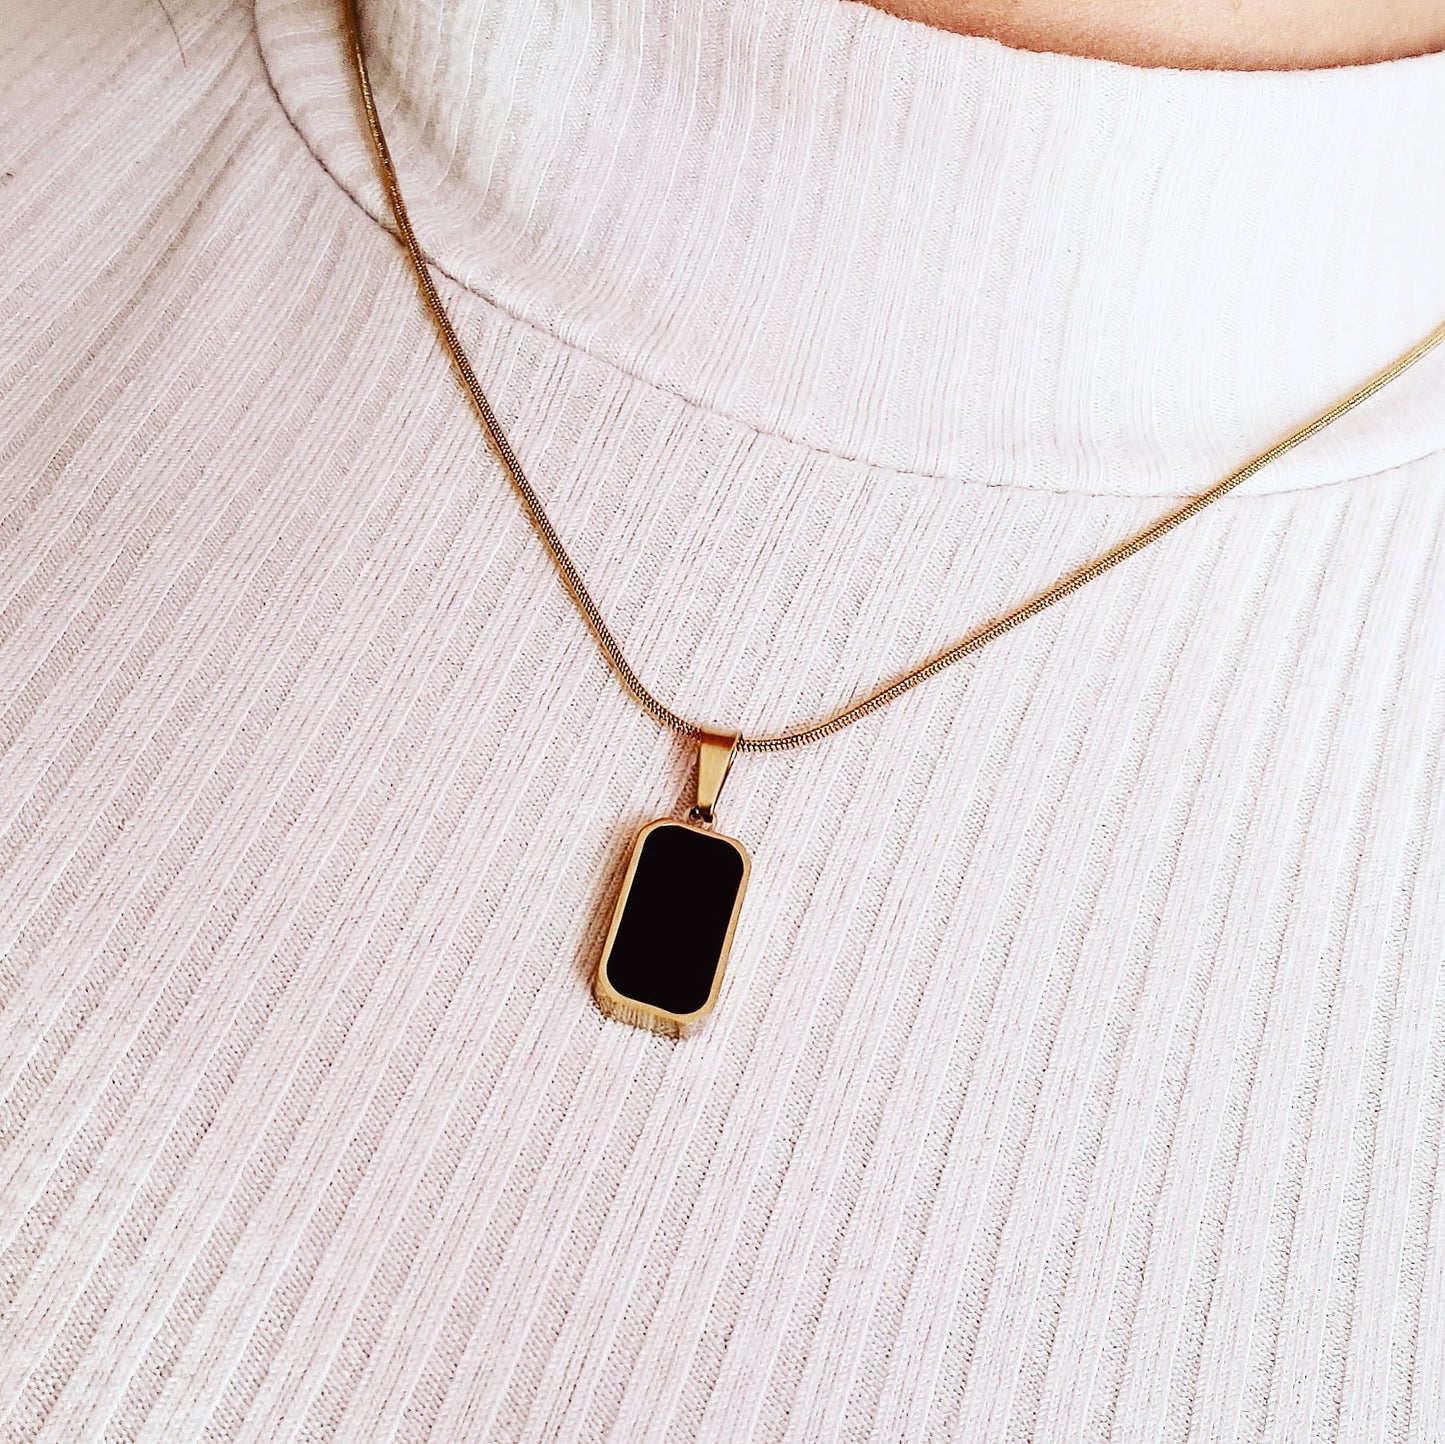 Charlotte Necklace featuring a sleek gold chain adorned with a double side black and white shell pendant